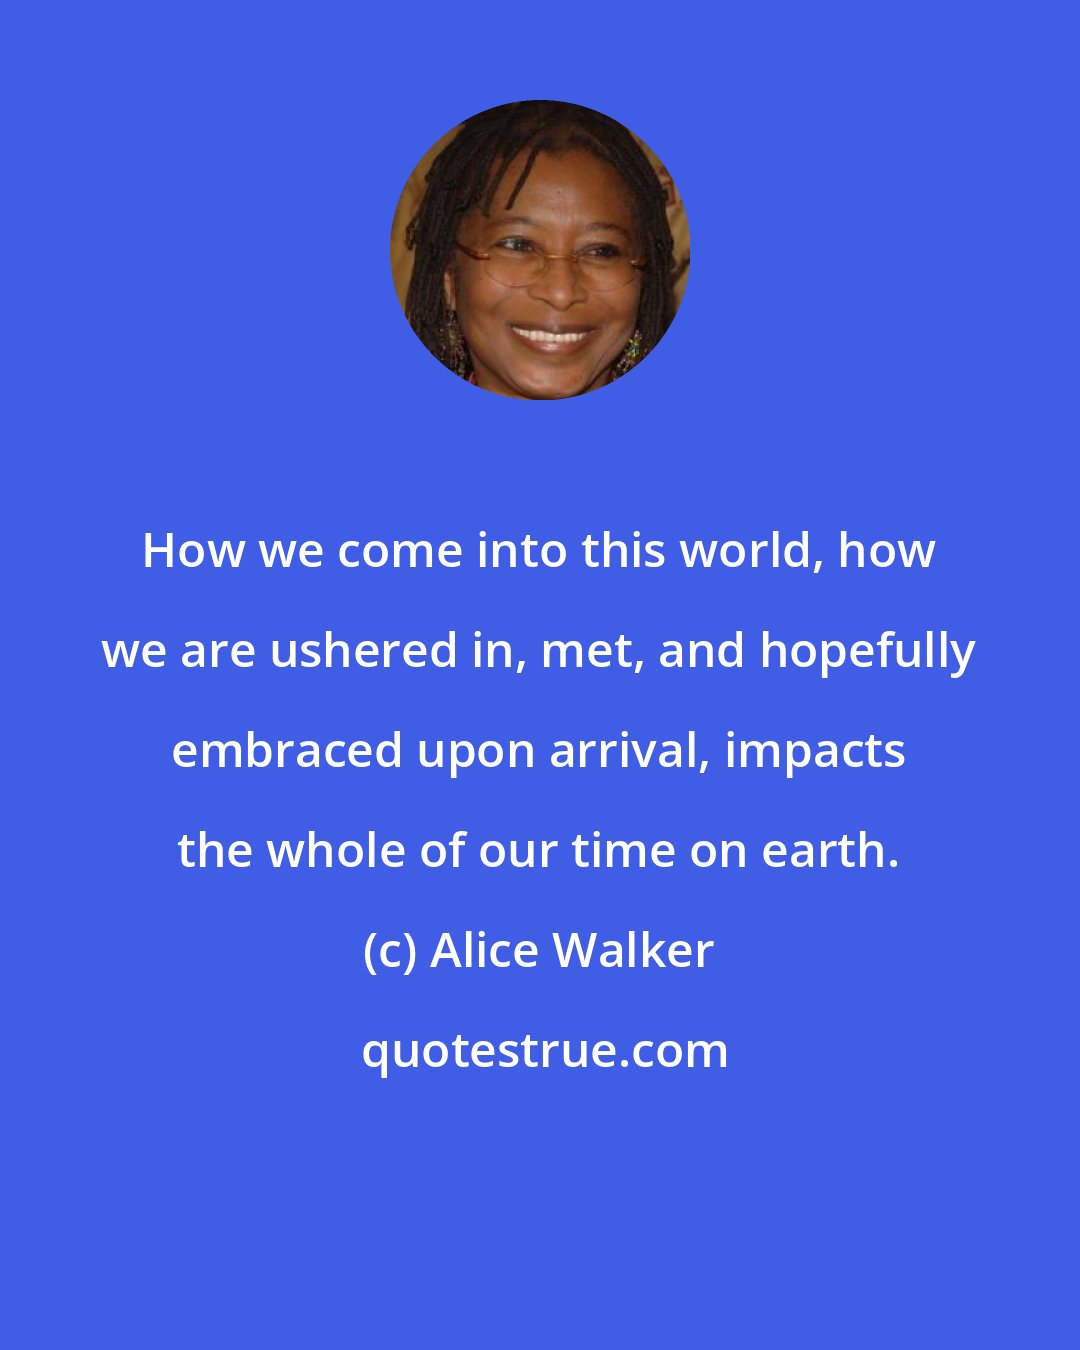 Alice Walker: How we come into this world, how we are ushered in, met, and hopefully embraced upon arrival, impacts the whole of our time on earth.